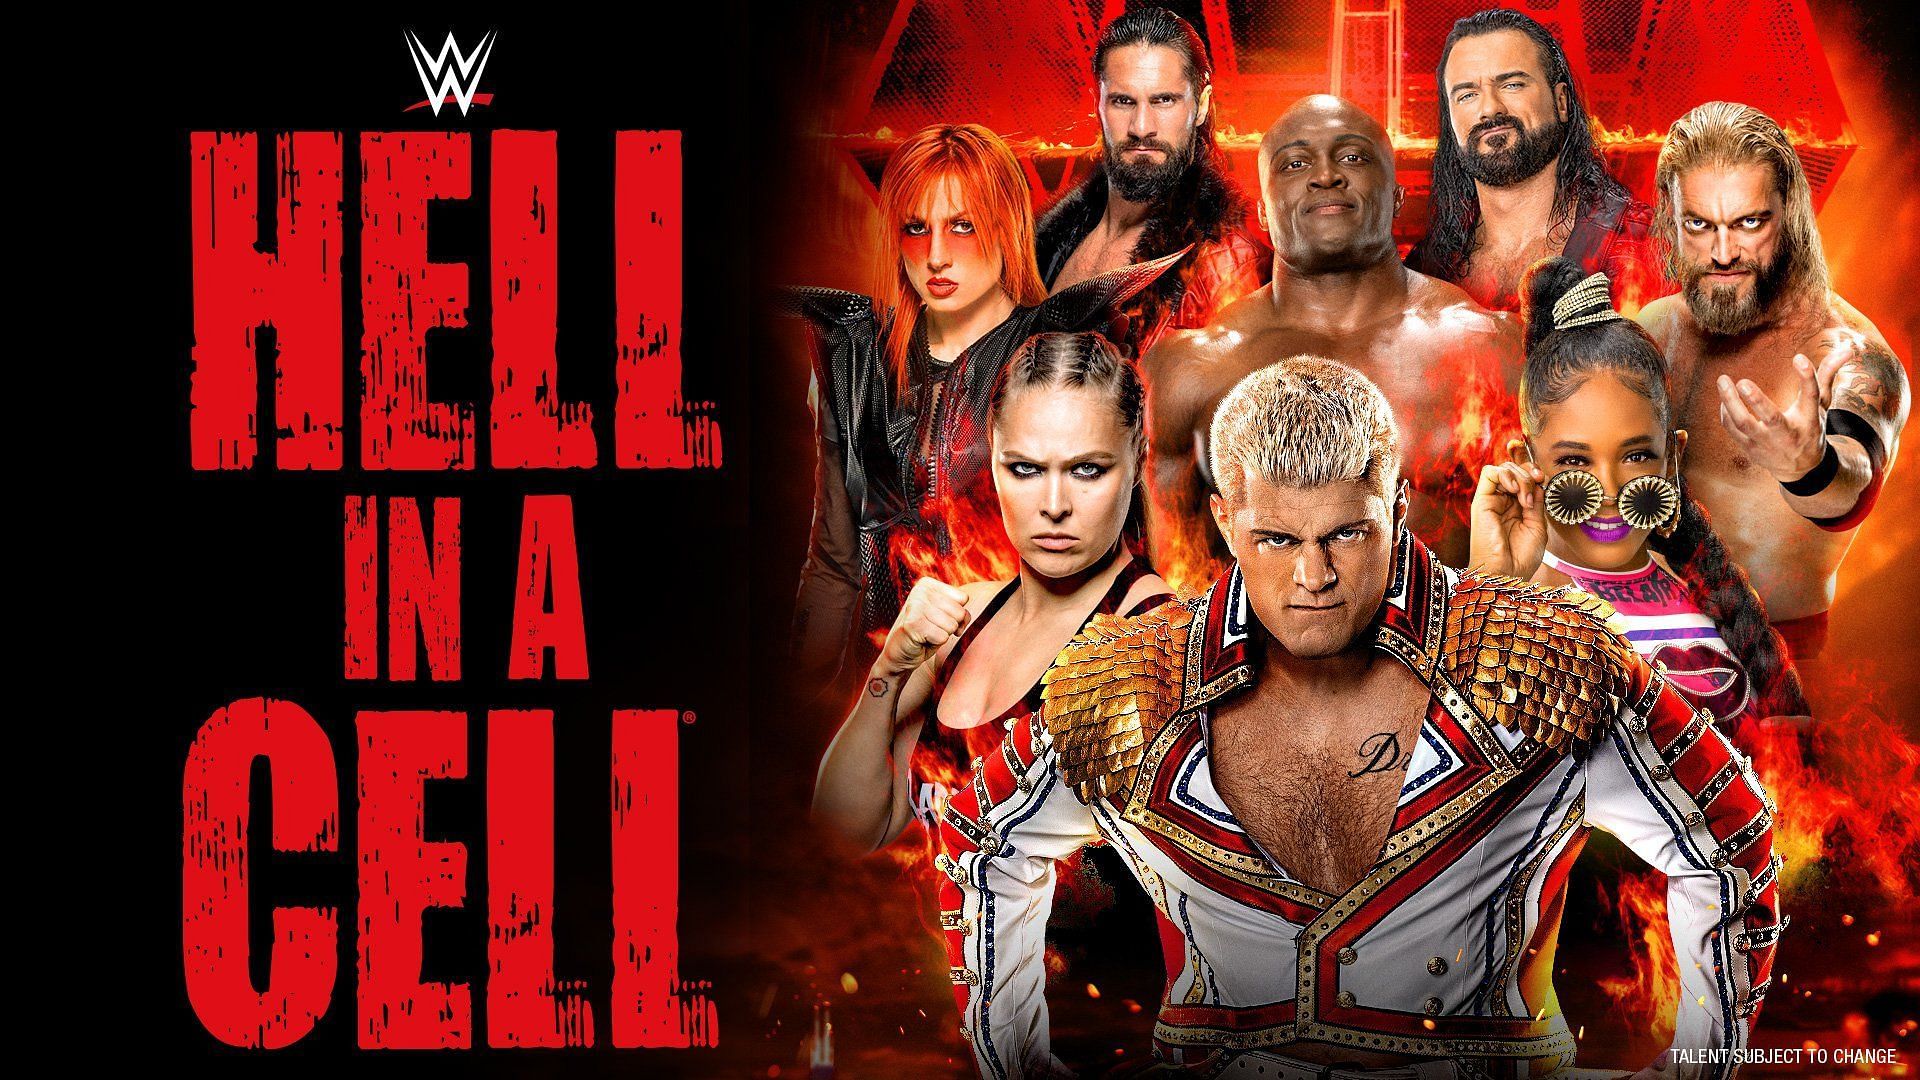 What will happen tonight at Hell in a Cell?